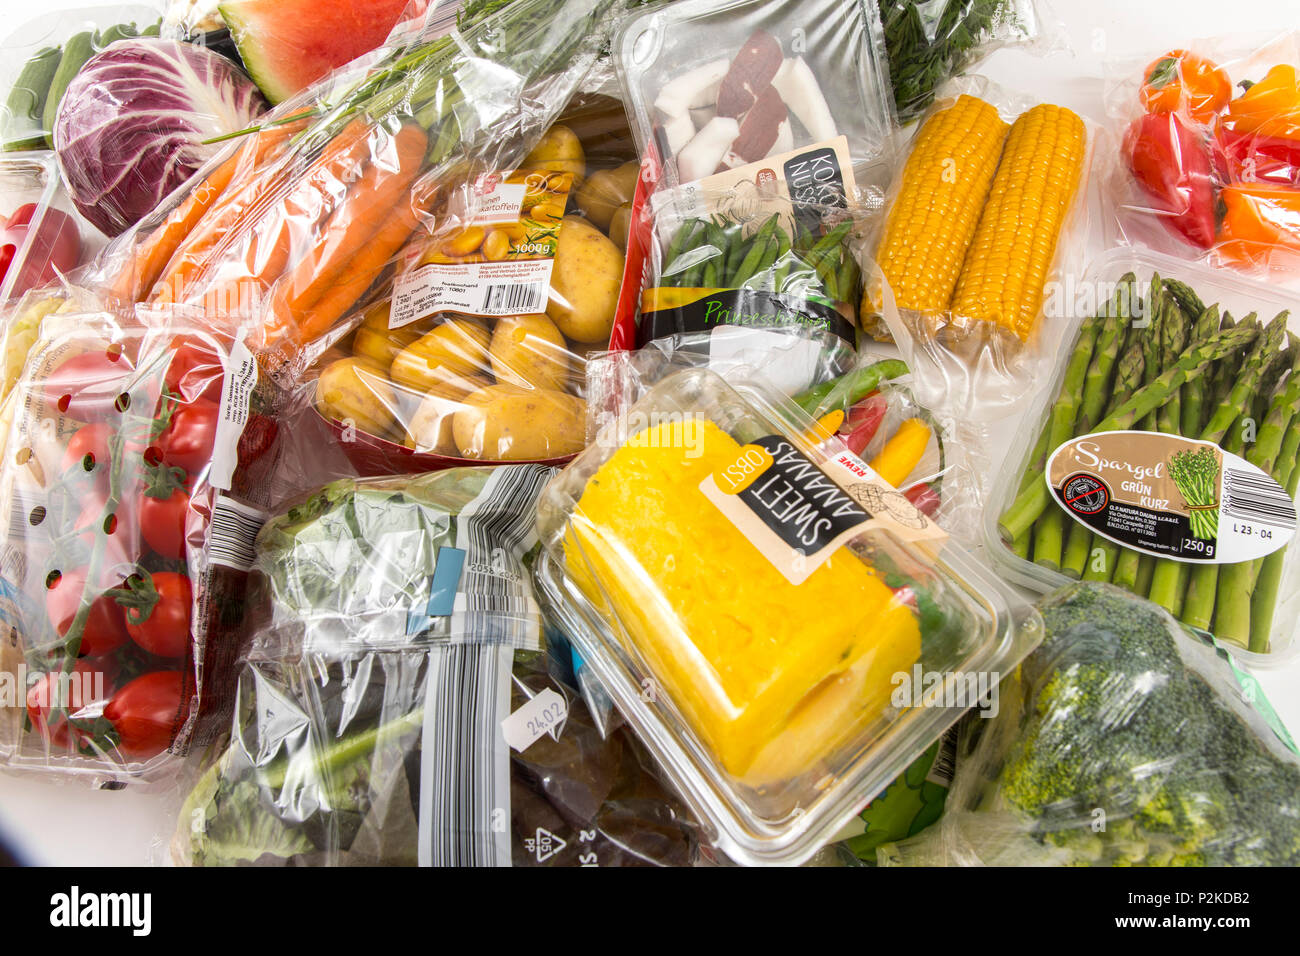 Fresh food, vegetables, fruit, each individually packaged in plastic wrap, all food is available in the same supermarket even without plastic packagin Stock Photo